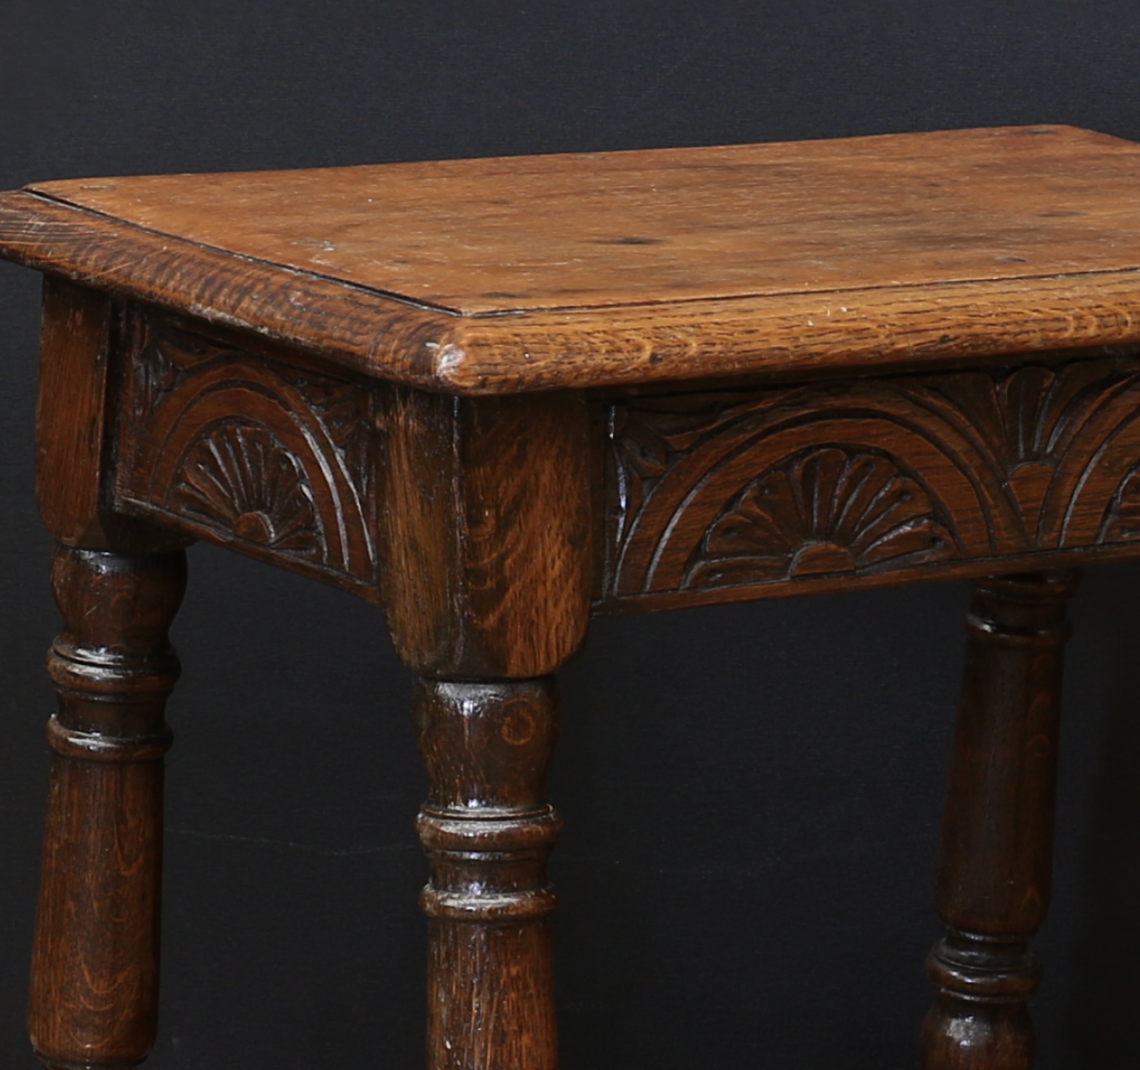 Jacobean Jointed Stool